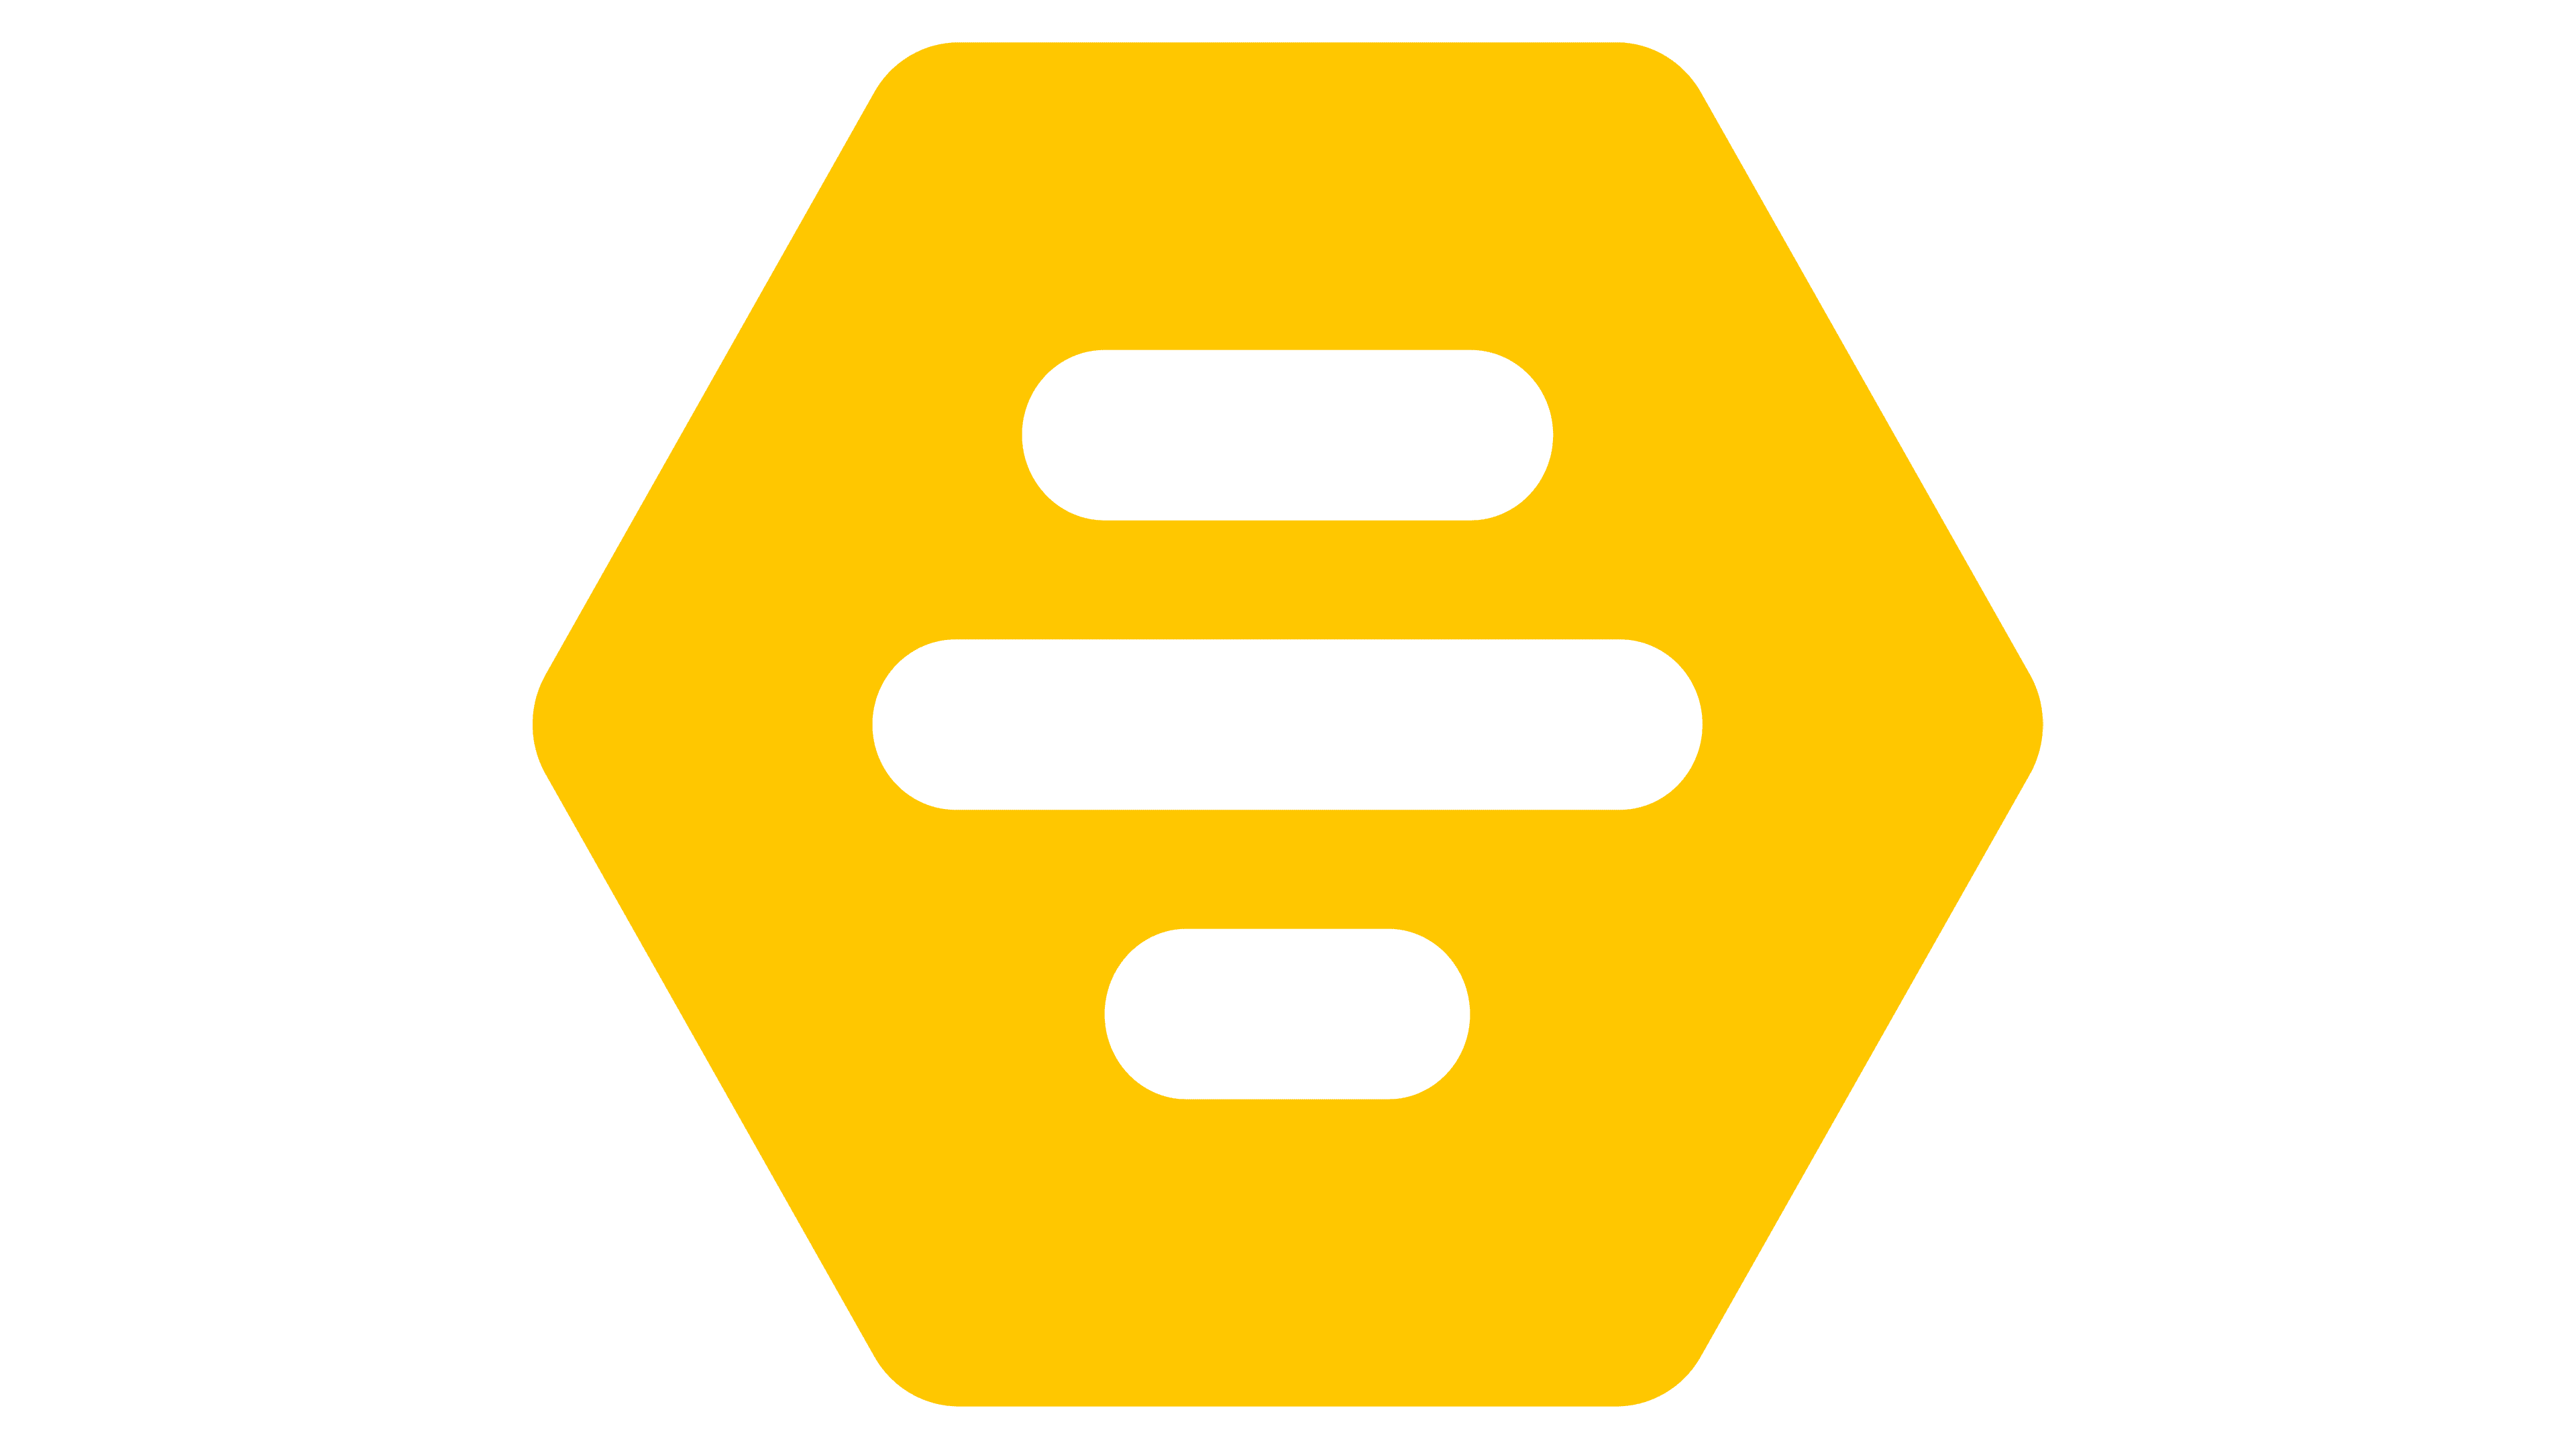 Share more than 126 bumble logo latest